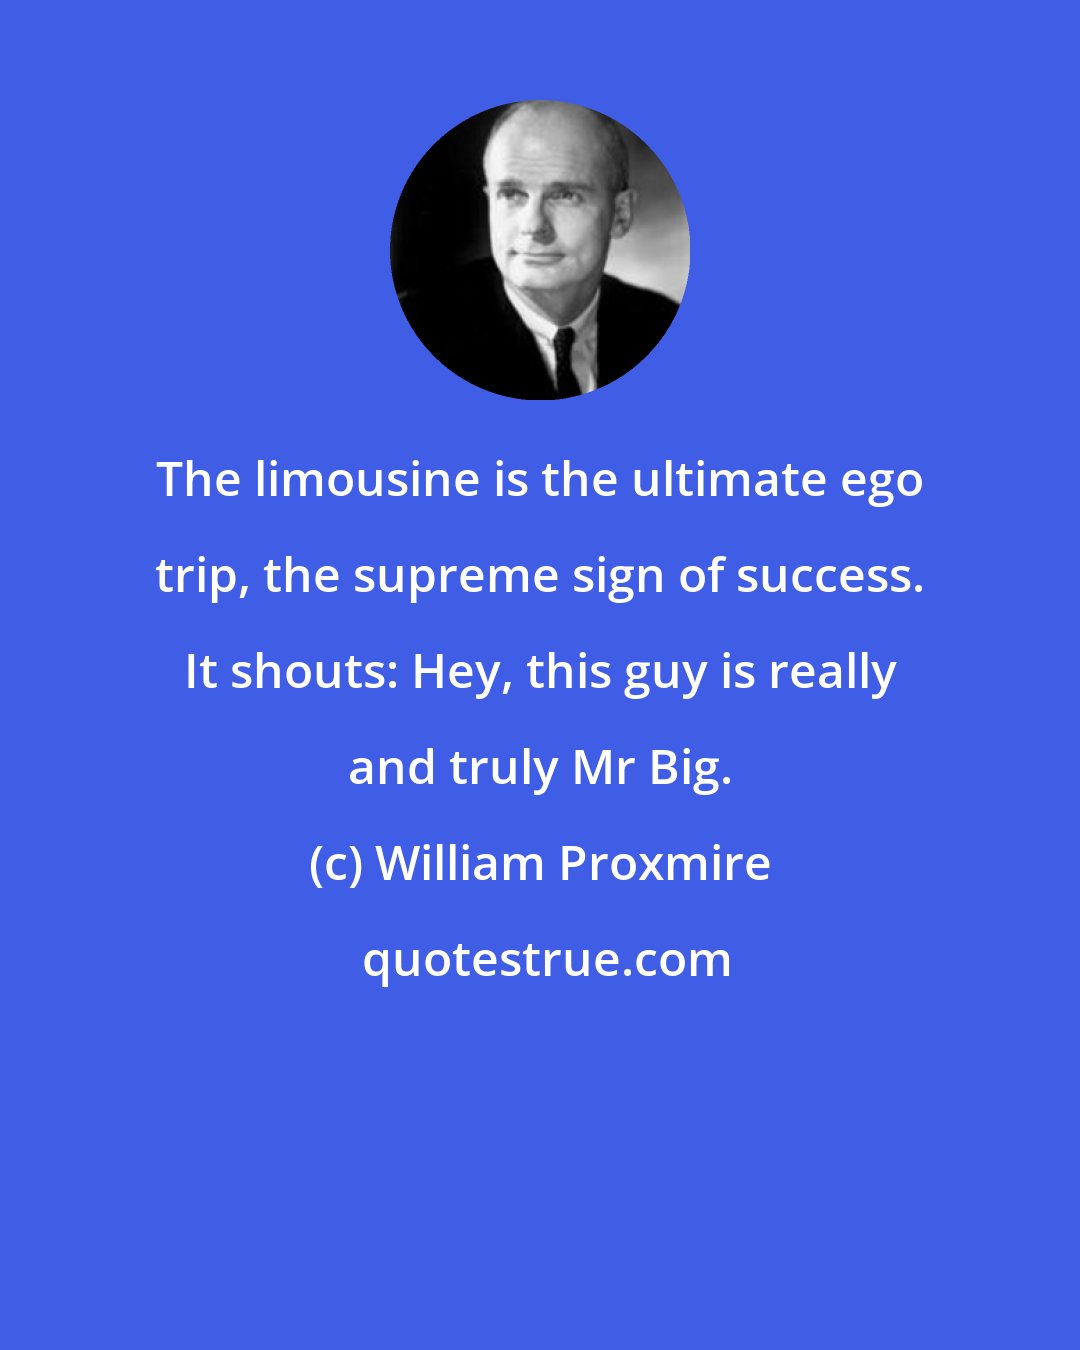 William Proxmire: The limousine is the ultimate ego trip, the supreme sign of success. It shouts: Hey, this guy is really and truly Mr Big.